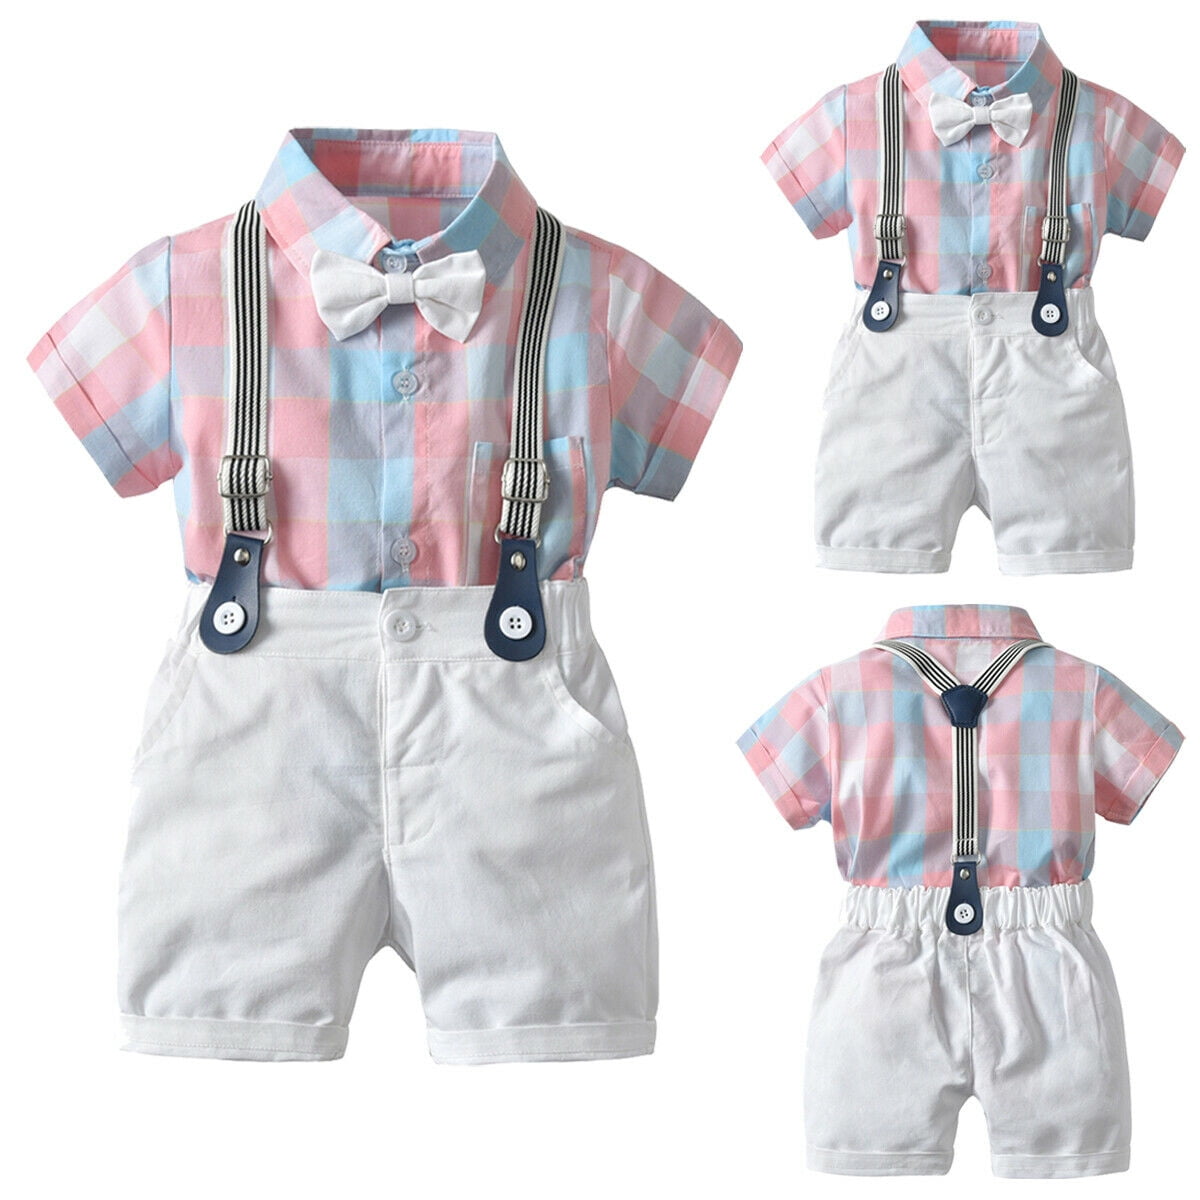 2PCS Toddler Baby Boys Gentleman Bow Tie T-Shirt Tops+Suspender Shorts Outfits 